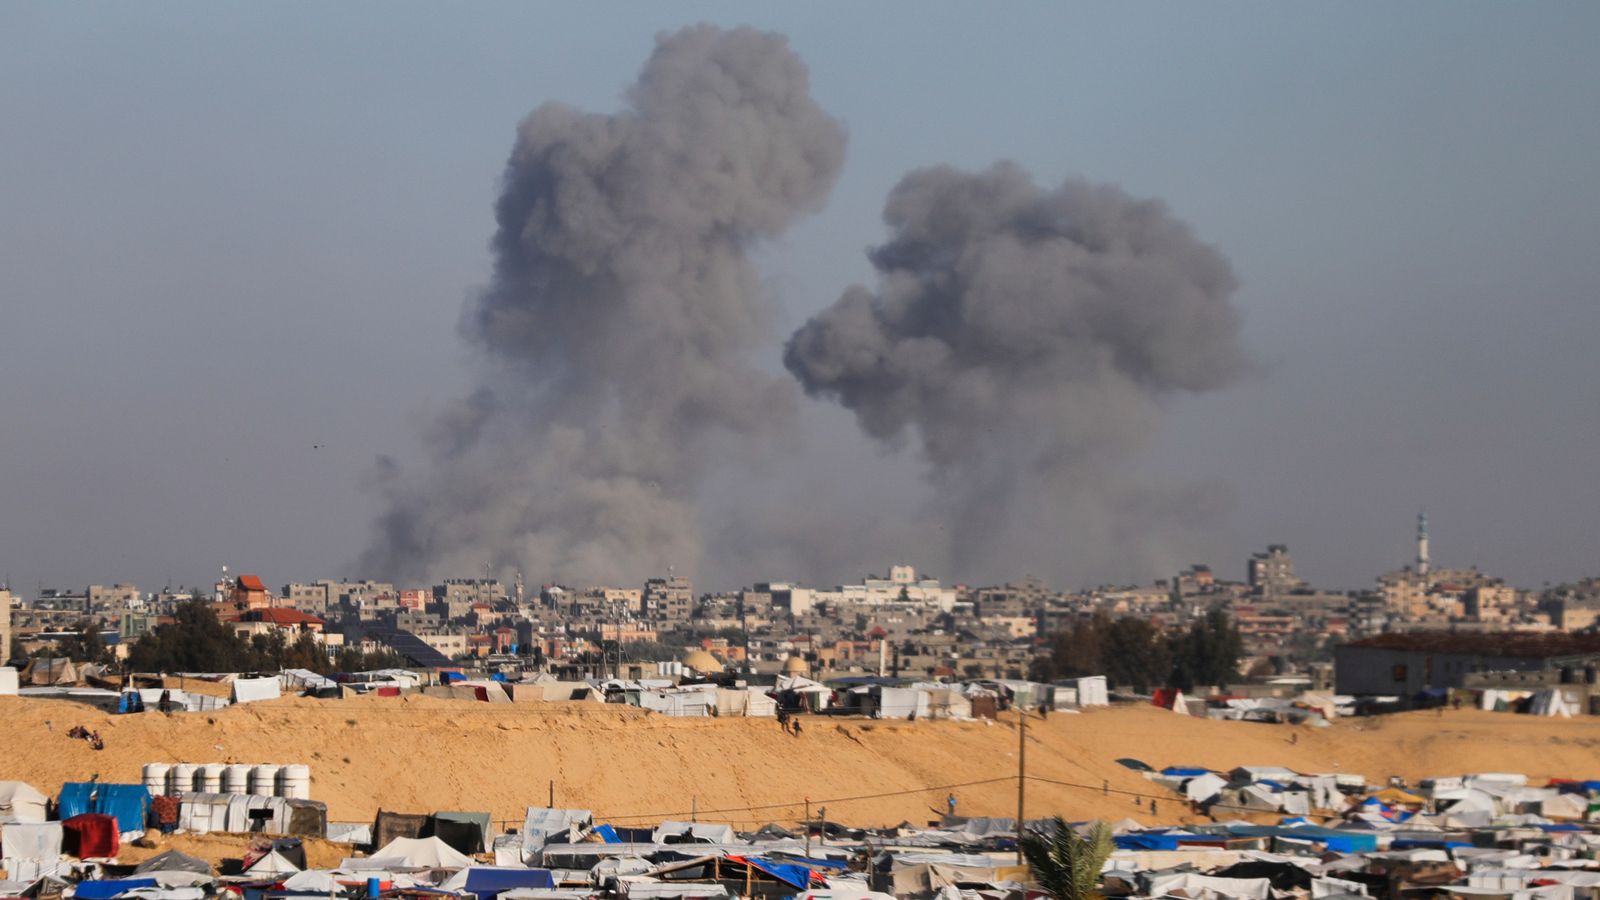 Israel rejects ceasefire proposal and continues assault on Gaza town of Rafah